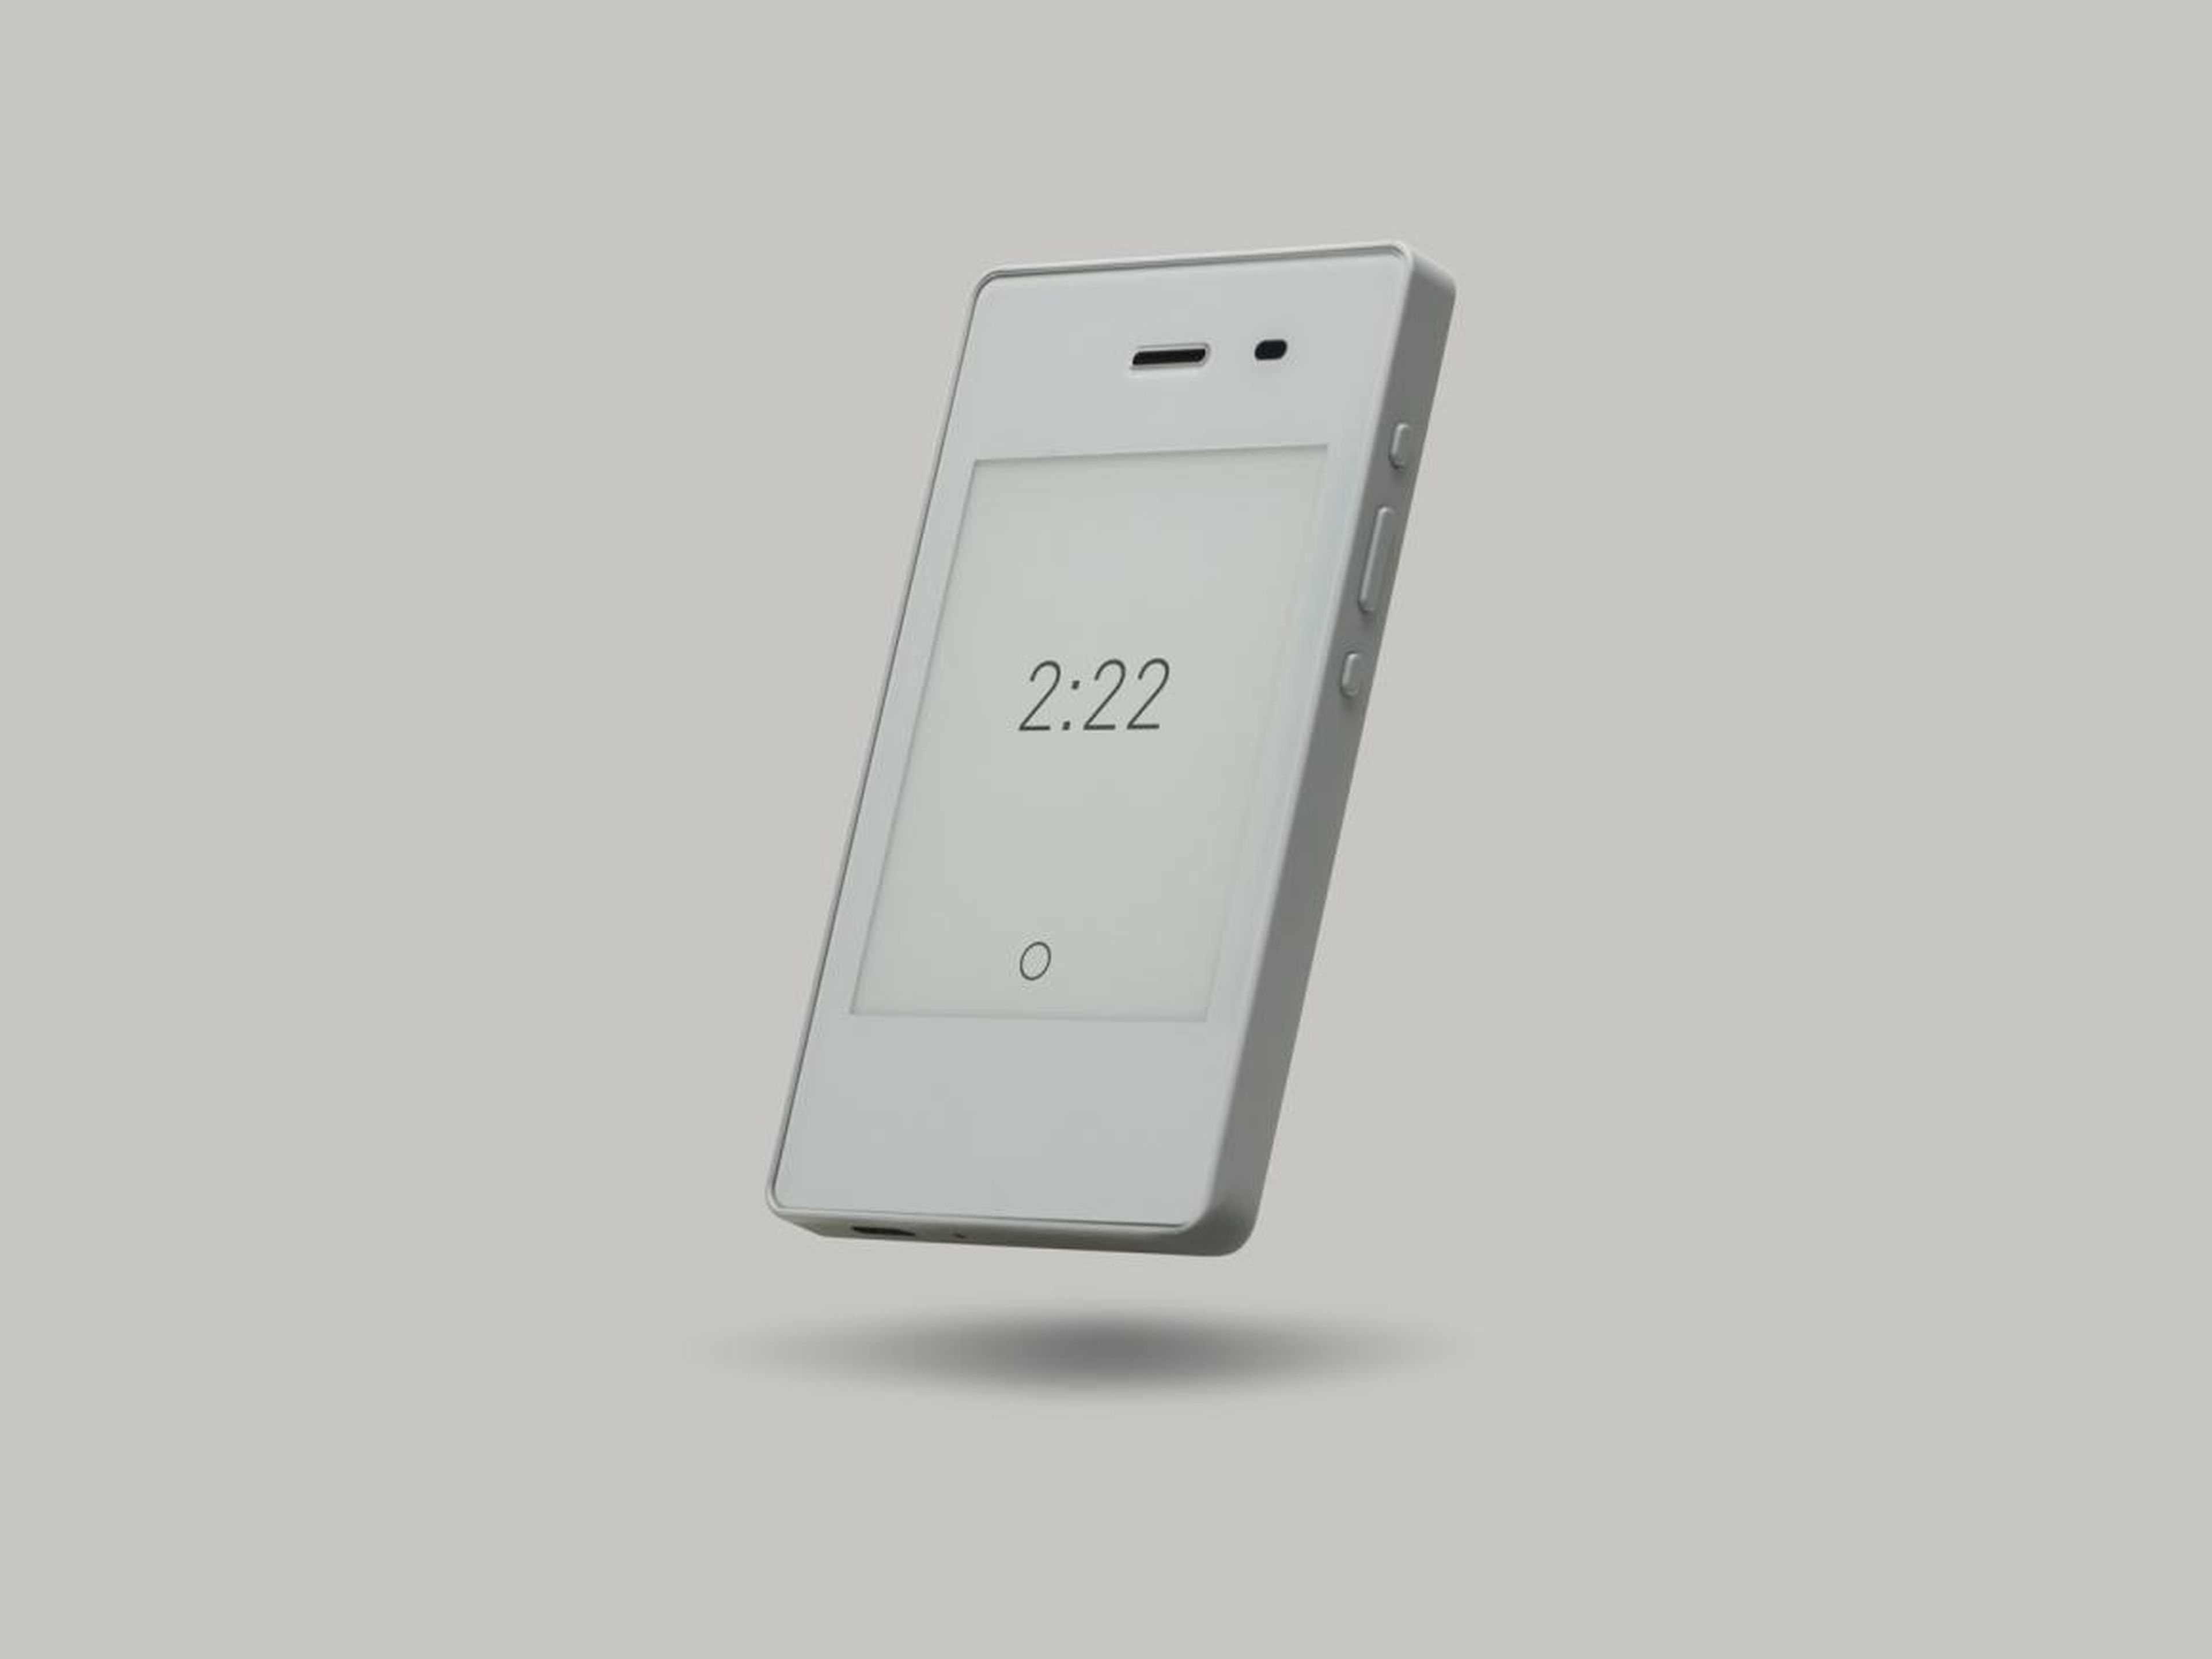 The Light Phone 2 costs $350 and has shipped to customers who preordered through Light's Indiegogo campaign. New Light Phone 2 orders will open up in March.